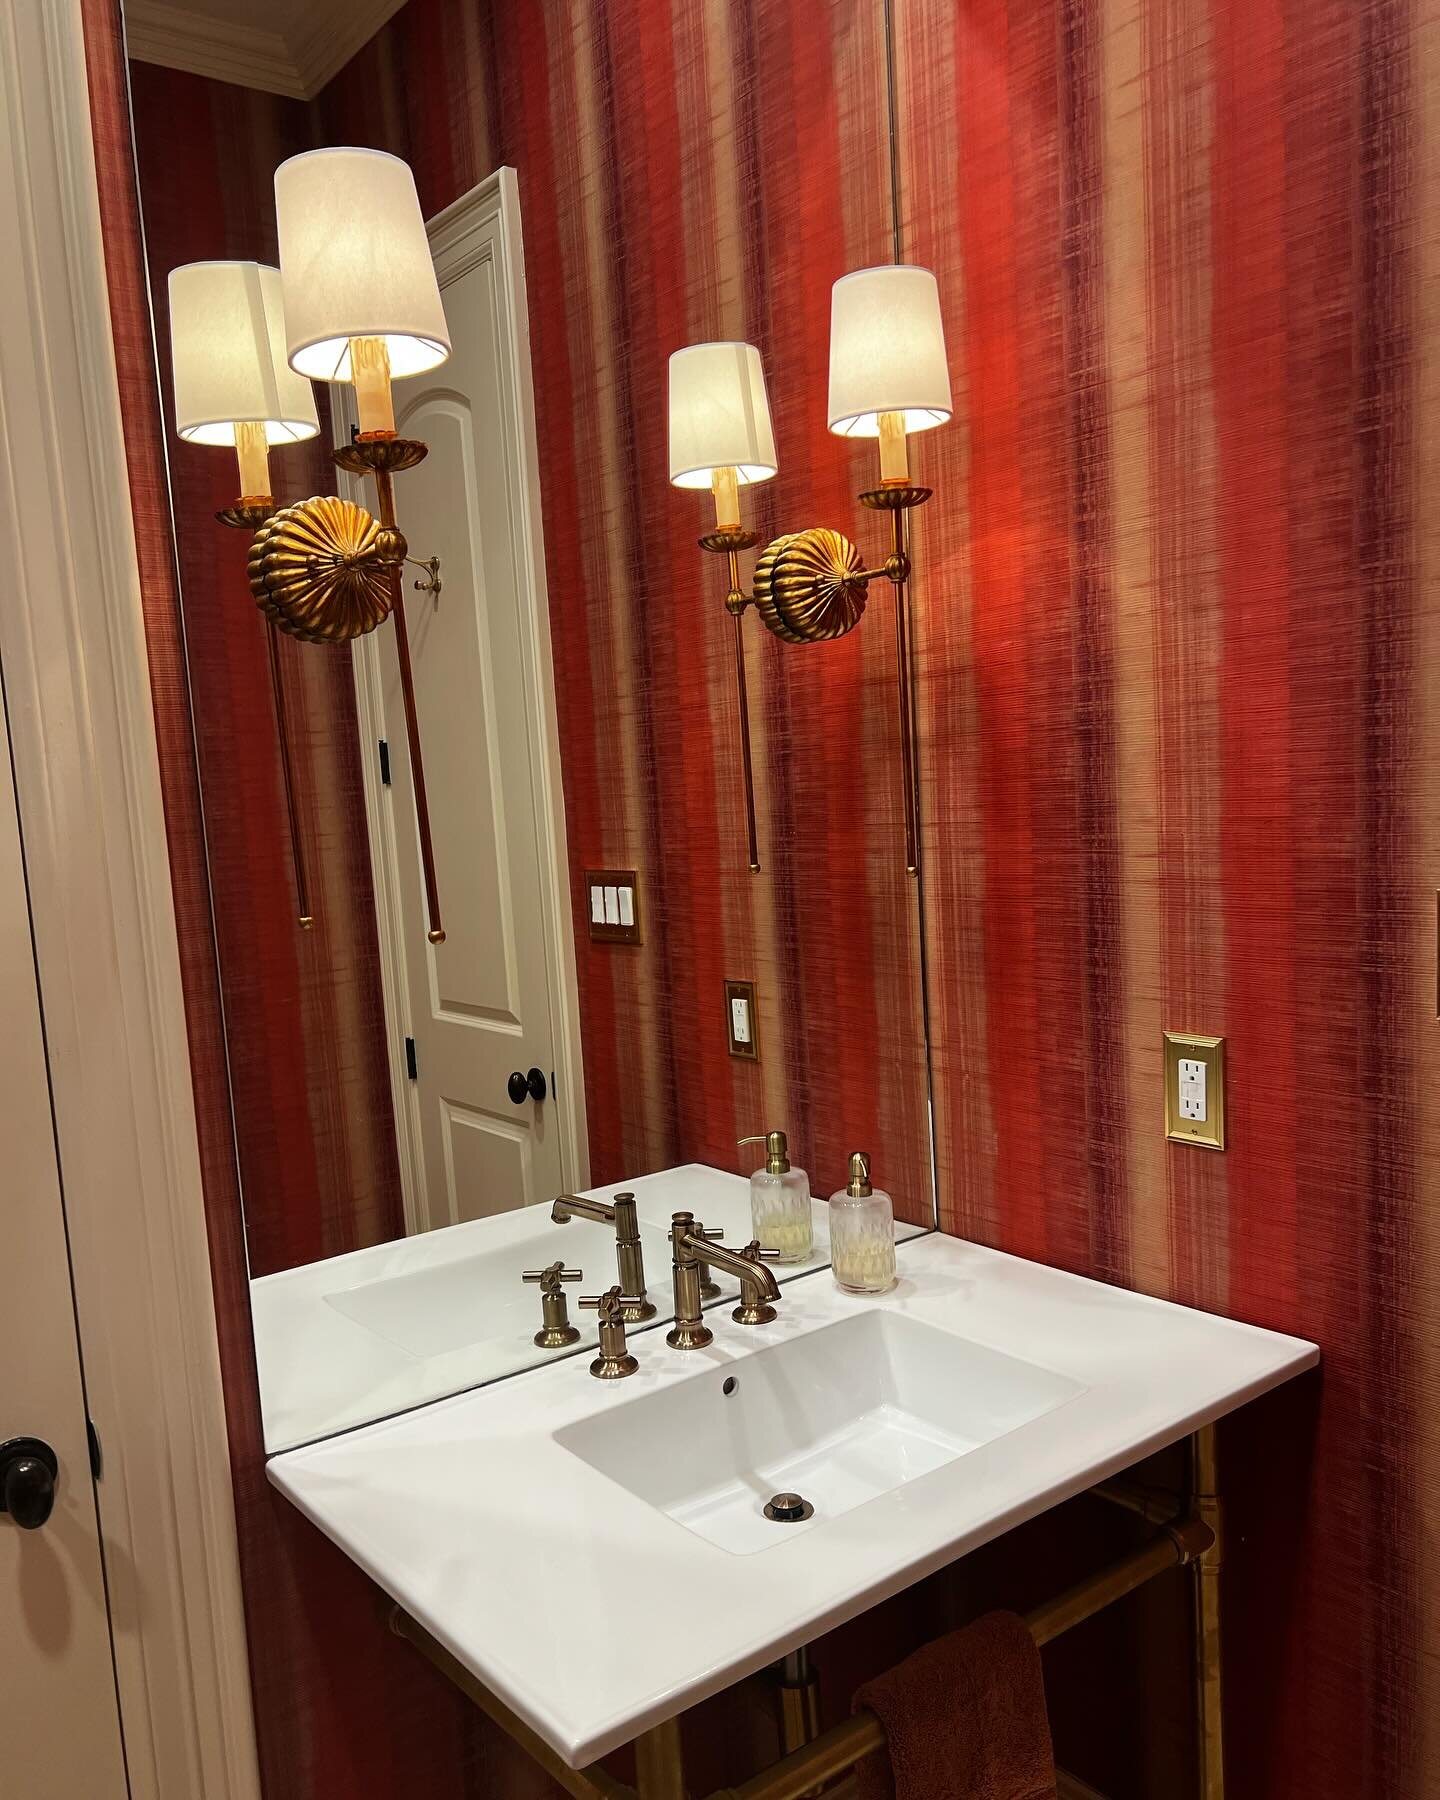 Transformed this bathroom into a luxury guest retreat 🔥 From the bold red wallpaper to the vintage brass fixtures, our walk-in shower and new sink make this space a showstopper.

➔ ➔ Swipe to see the before!